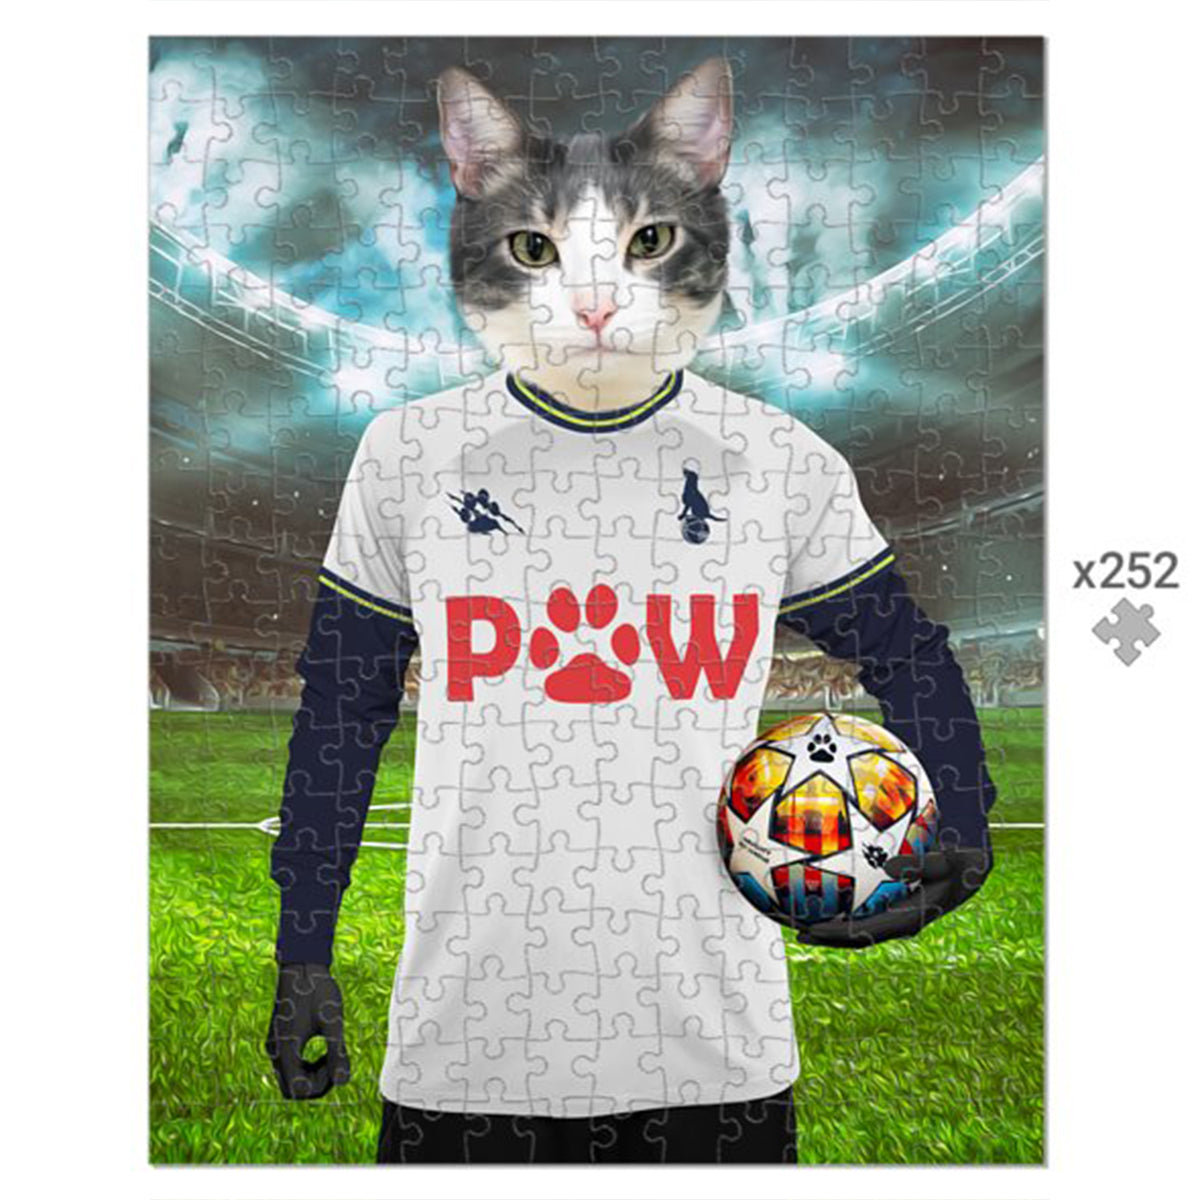 Tottenham Hotspaw Football Club Paw & Glory, paw and glory, for pet portraits, painting of your dog, professional pet photos, best dog paintings, animal portrait pictures, hogwarts dog houses, pet portrait